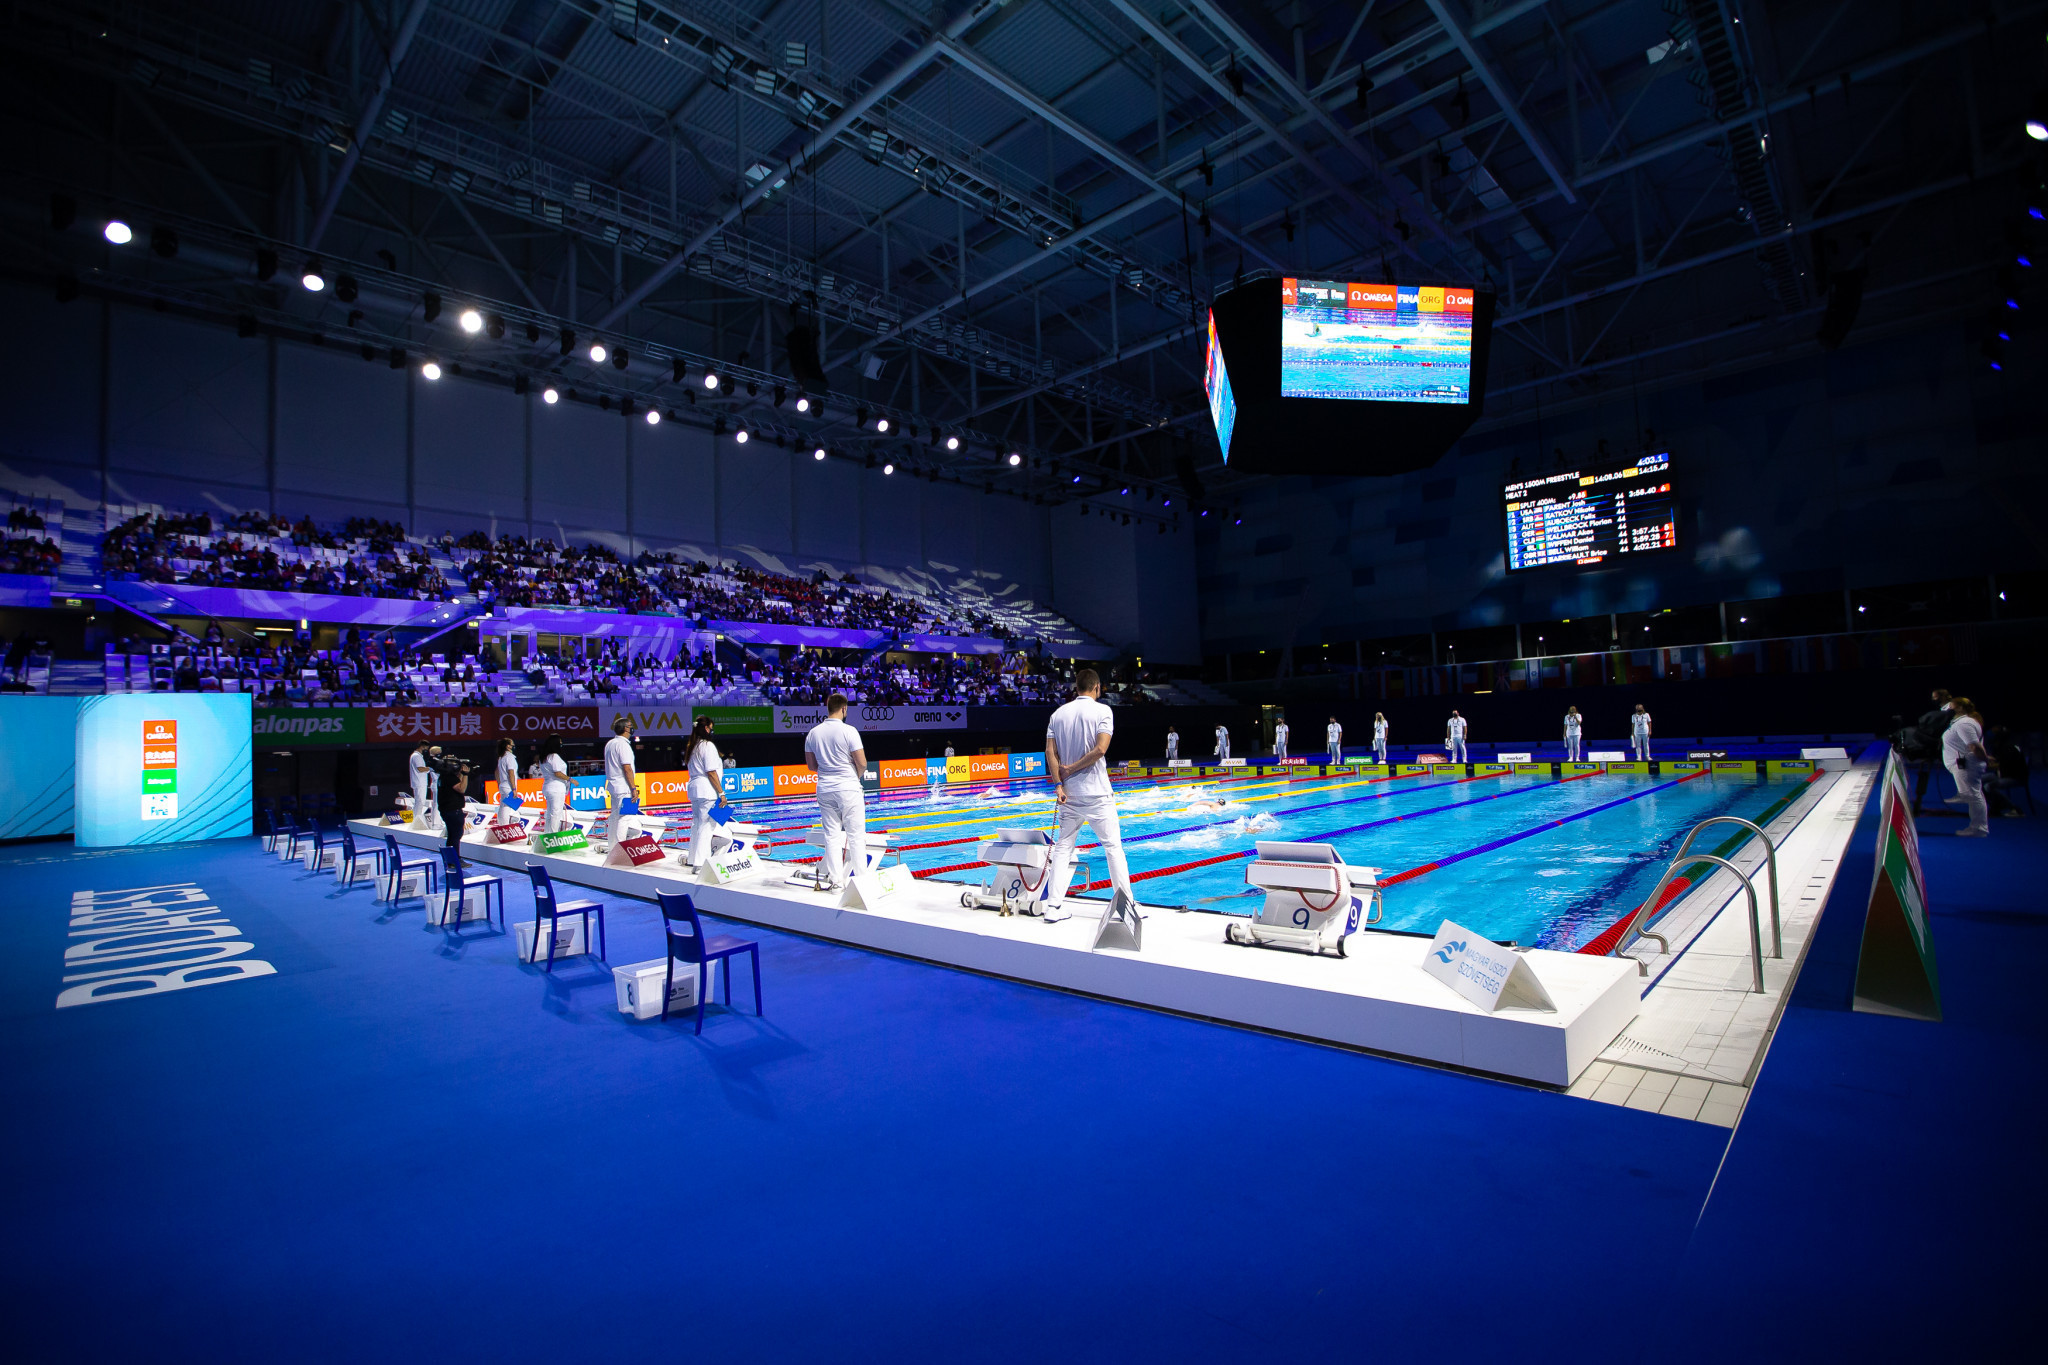 Budapest's Duna Arena, which staged the 2017 FINA World Championships, is hosting this year's edition and is set to host again in 2027 ©Getty Images